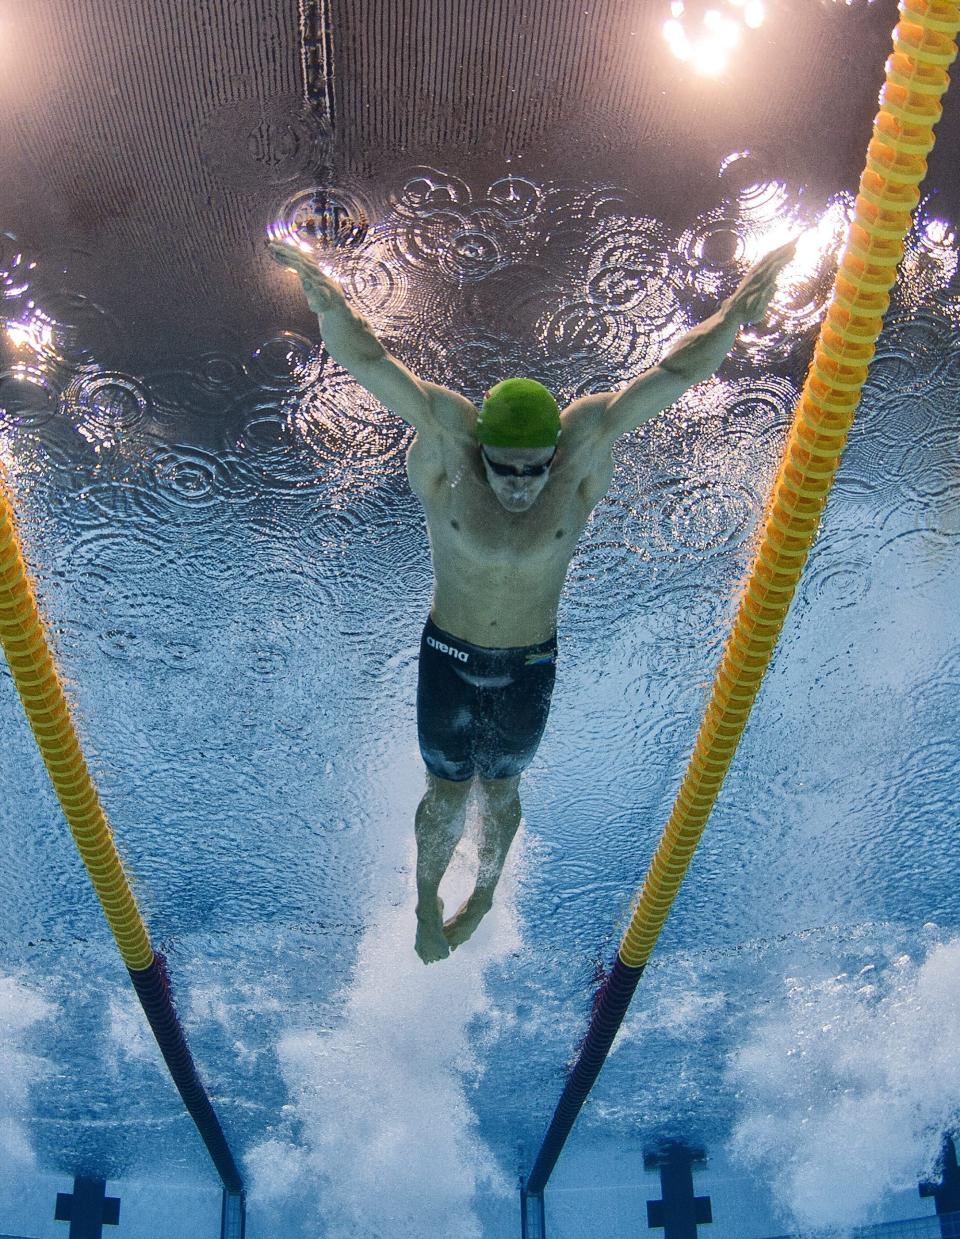 Winner and world record setter Cameron van der Burgh of South Africa on his way winning the men's 100m Breaststroke final during the Swimming competition held at the Aquatics Center during the London 2012 Olympic Games Swimming competition, London, Britain, 29 July 2012. Van der Burgh won in world record time of 58.46 seconds. Scozzoli placed 7th and Rickard 6th. EPA/PATRICK B. KRAEMER